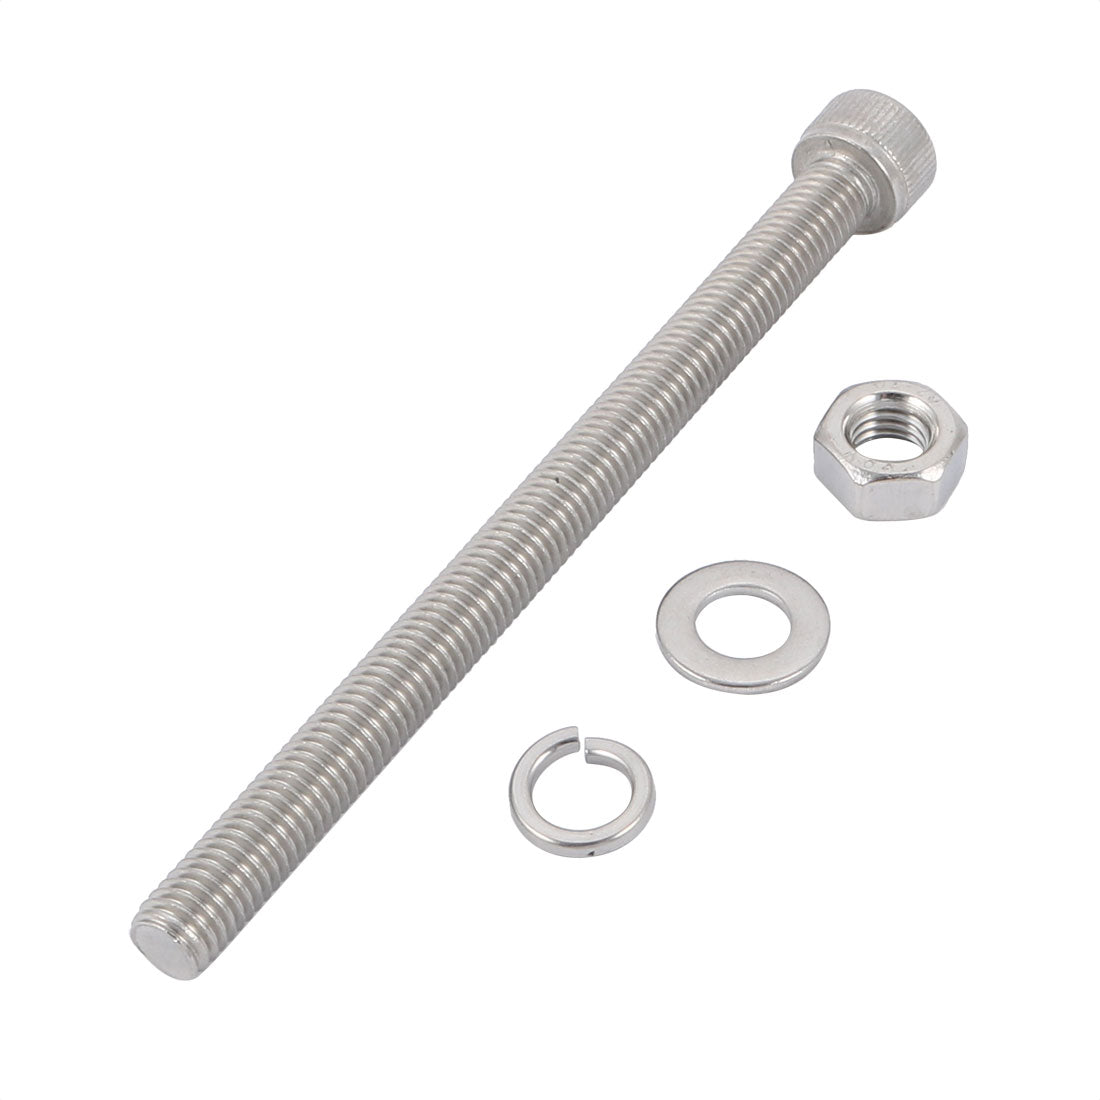 uxcell Uxcell 10Pcs M8x100mm 304 Stainless Steel Knurled Hex Socket Head Bolt Nut Set w Washer